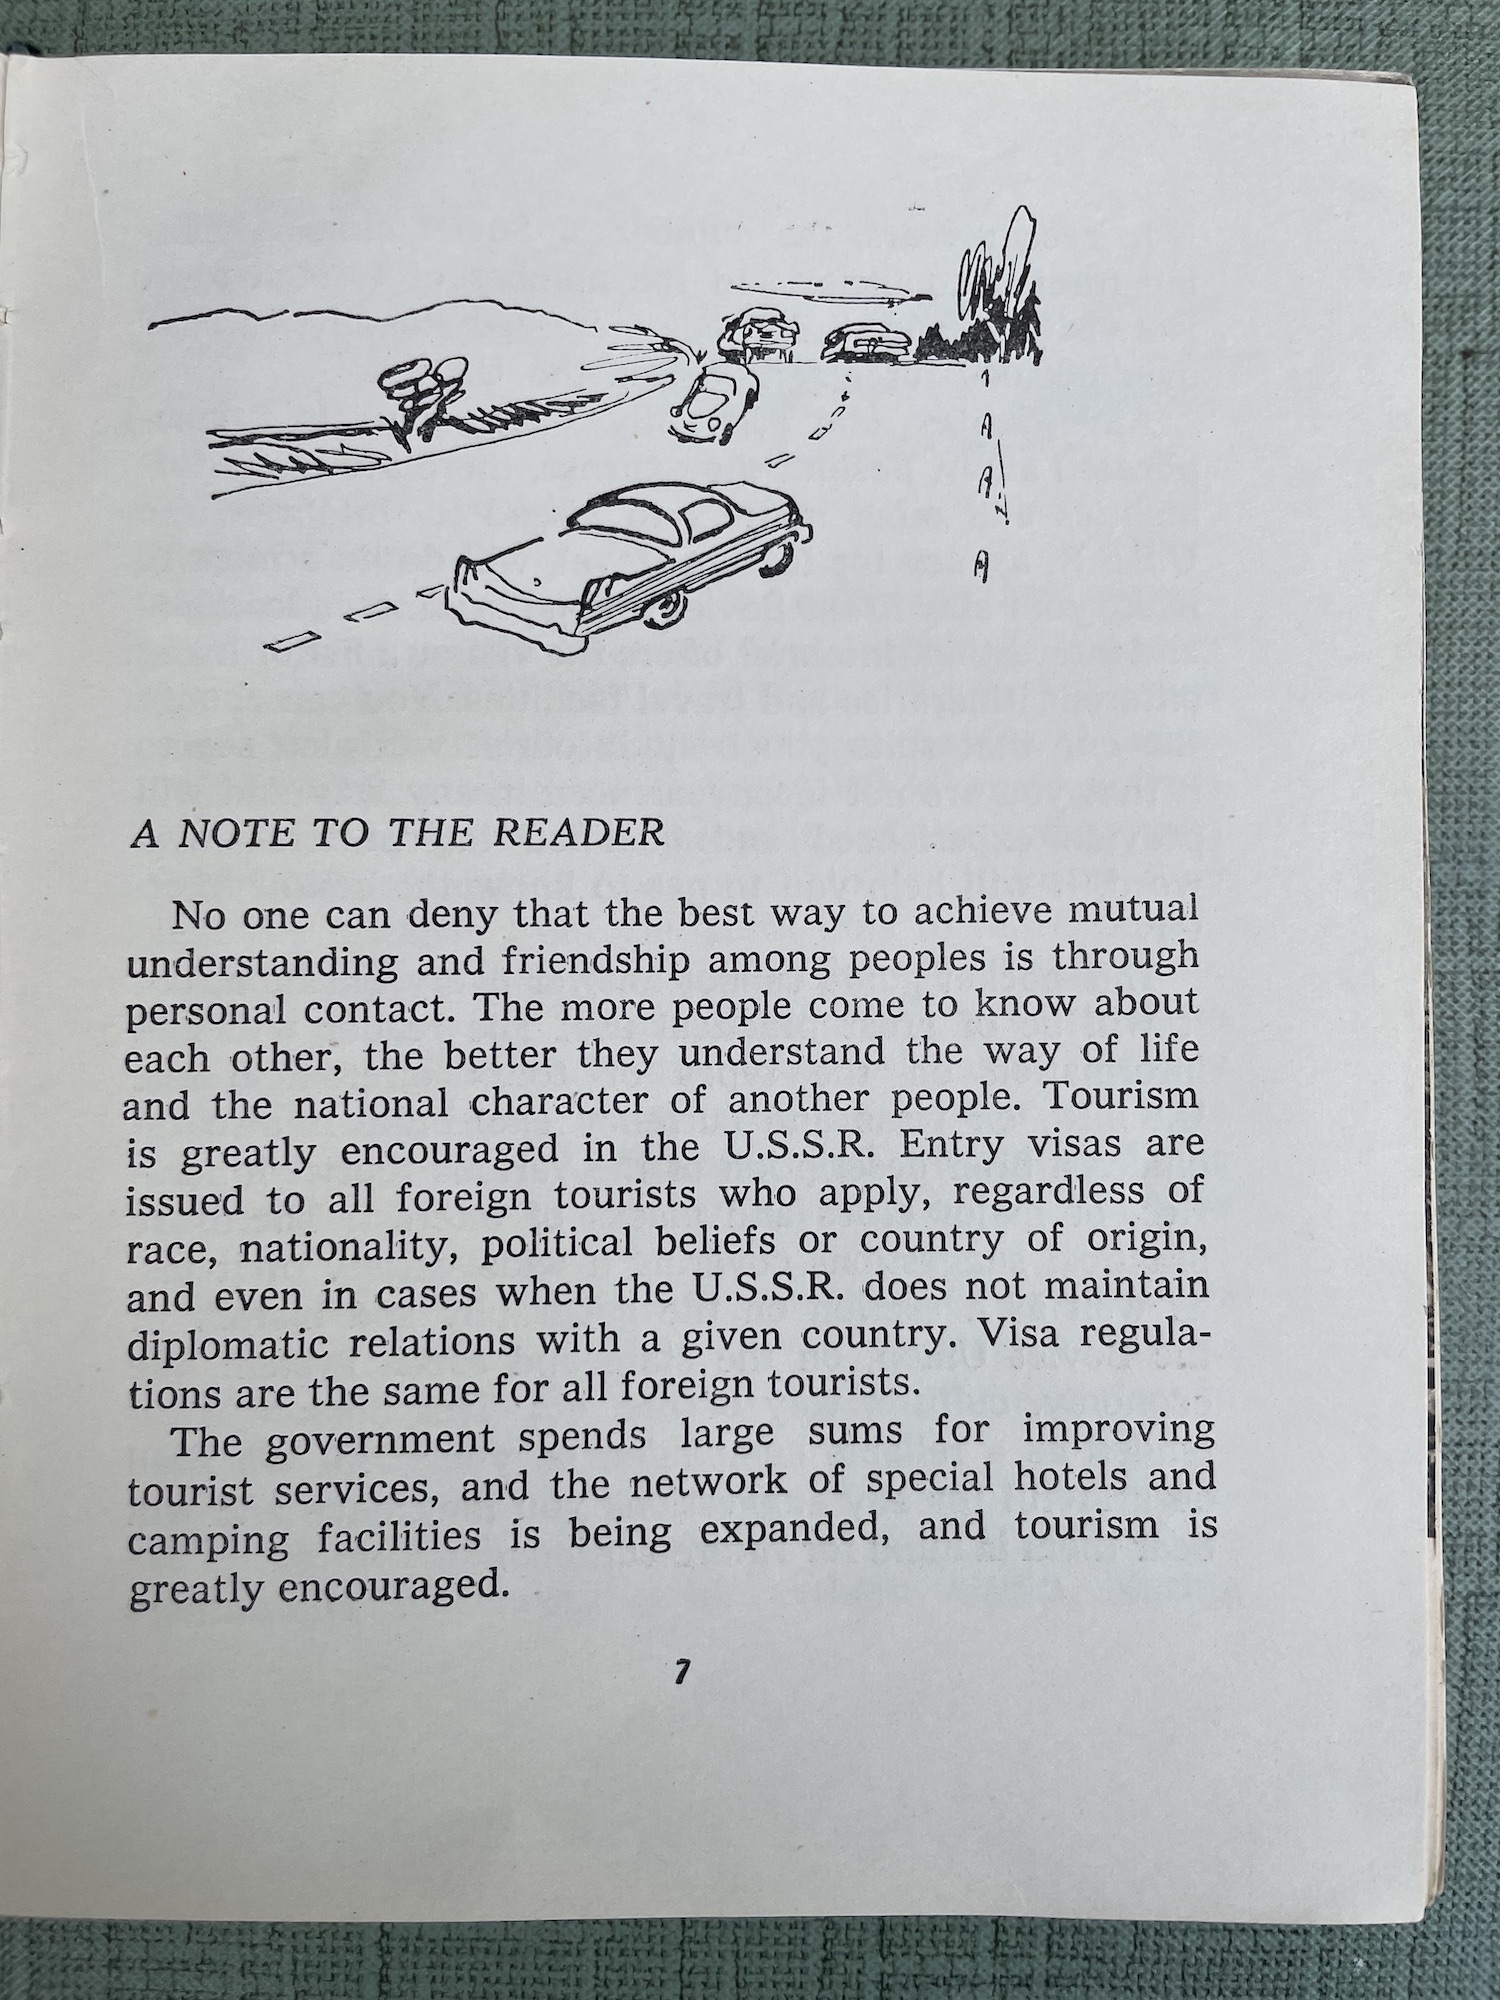 A cartoon image of a car driving along a highway and text that reads "A Note to the Reader."